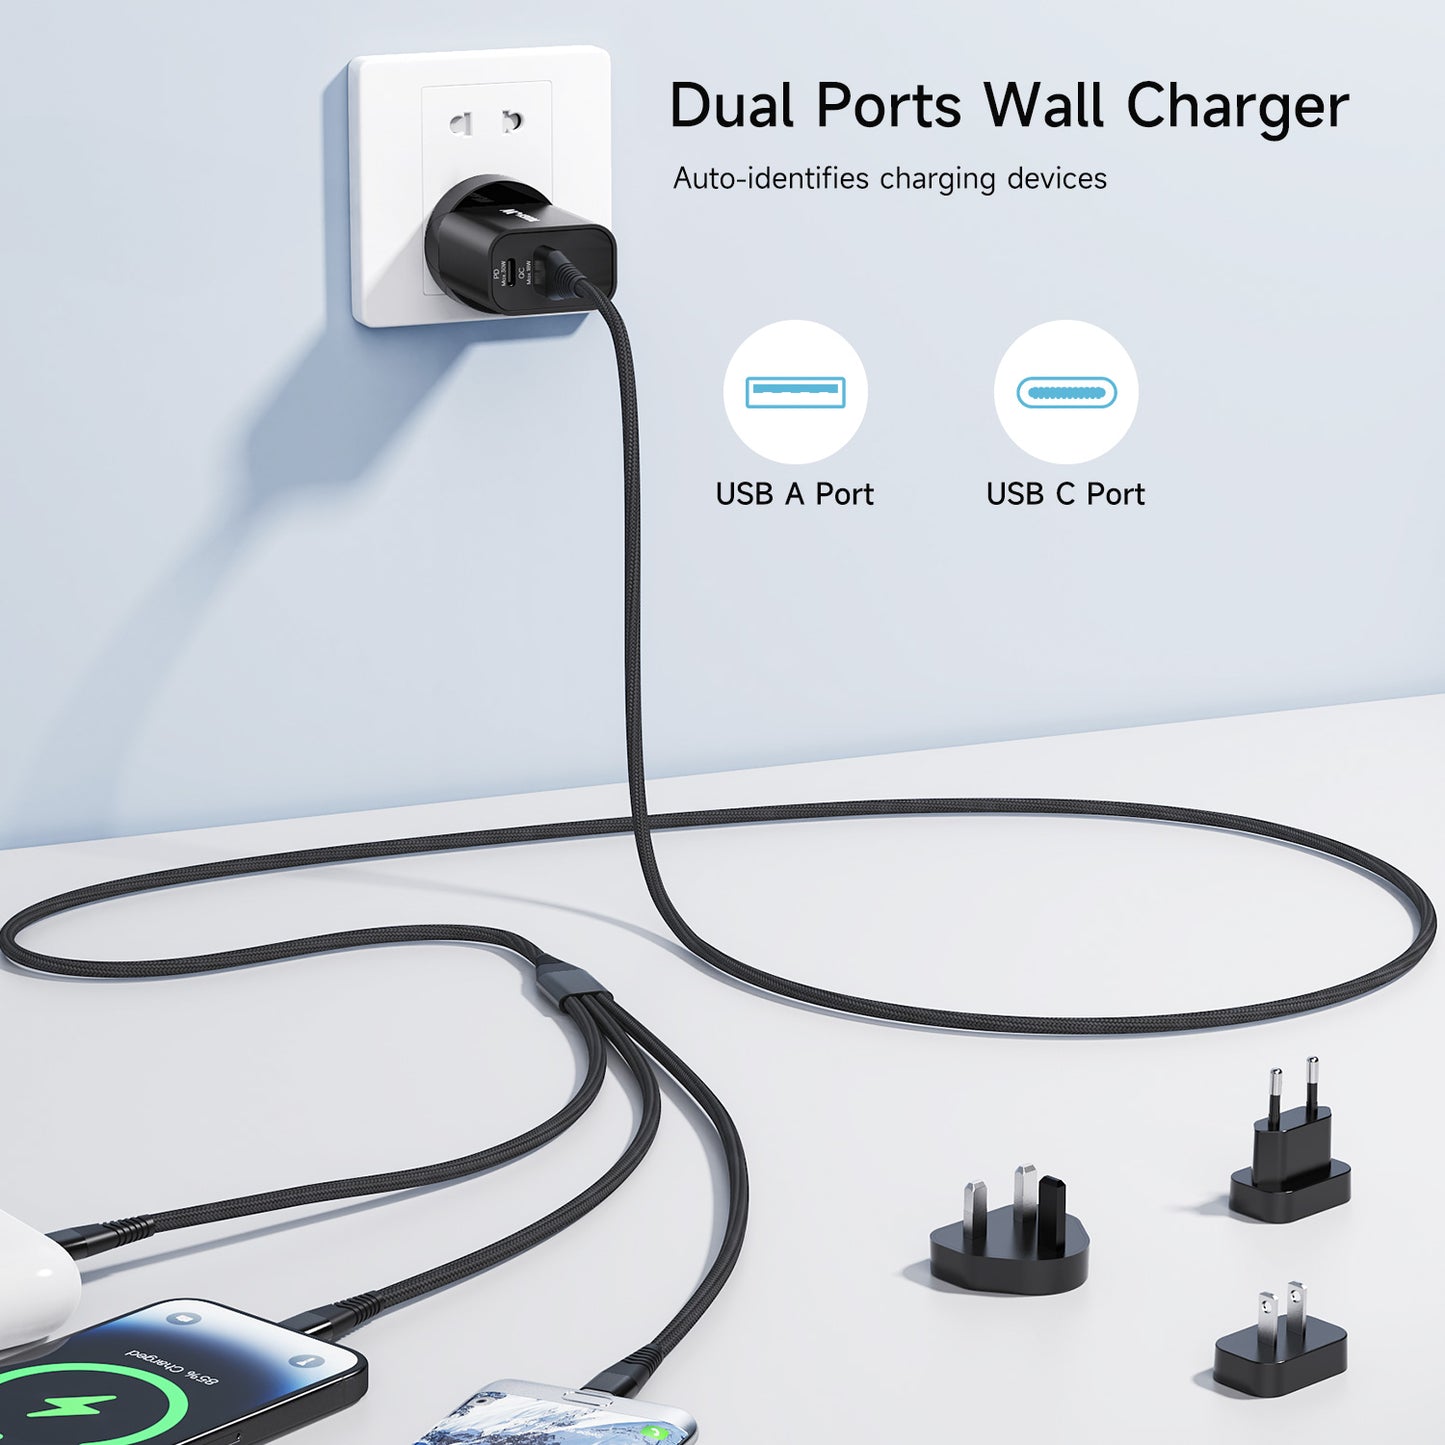 Tough on 30W Dual Port Universal Travel Fast Wall Charger with Cable